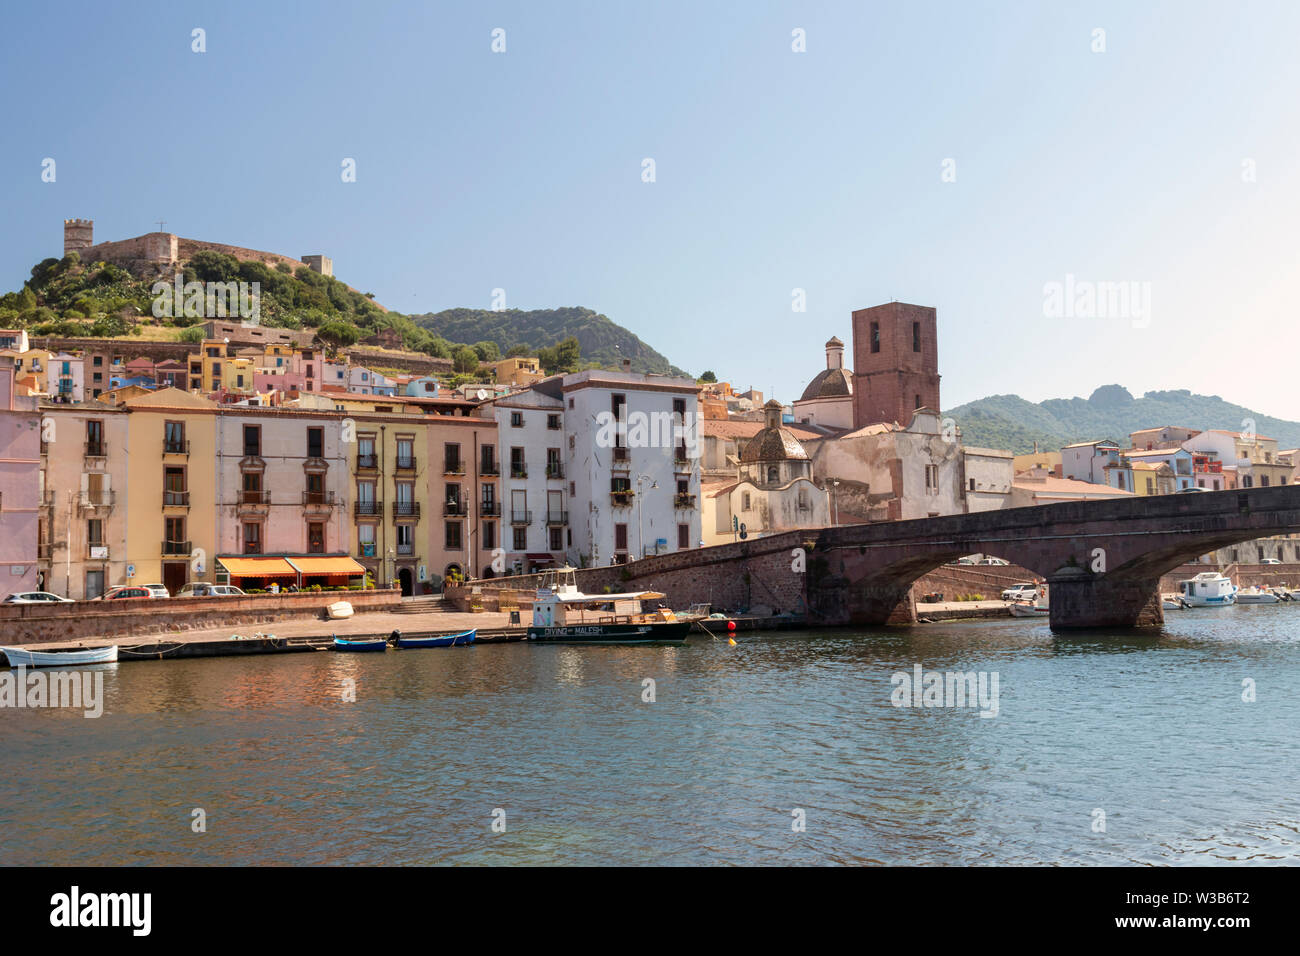 View of Bosa, Sardinia, with colorful Italian houses and castle on hilltop. River Temo with bridge in foreground. Summer day shot. Stock Photo